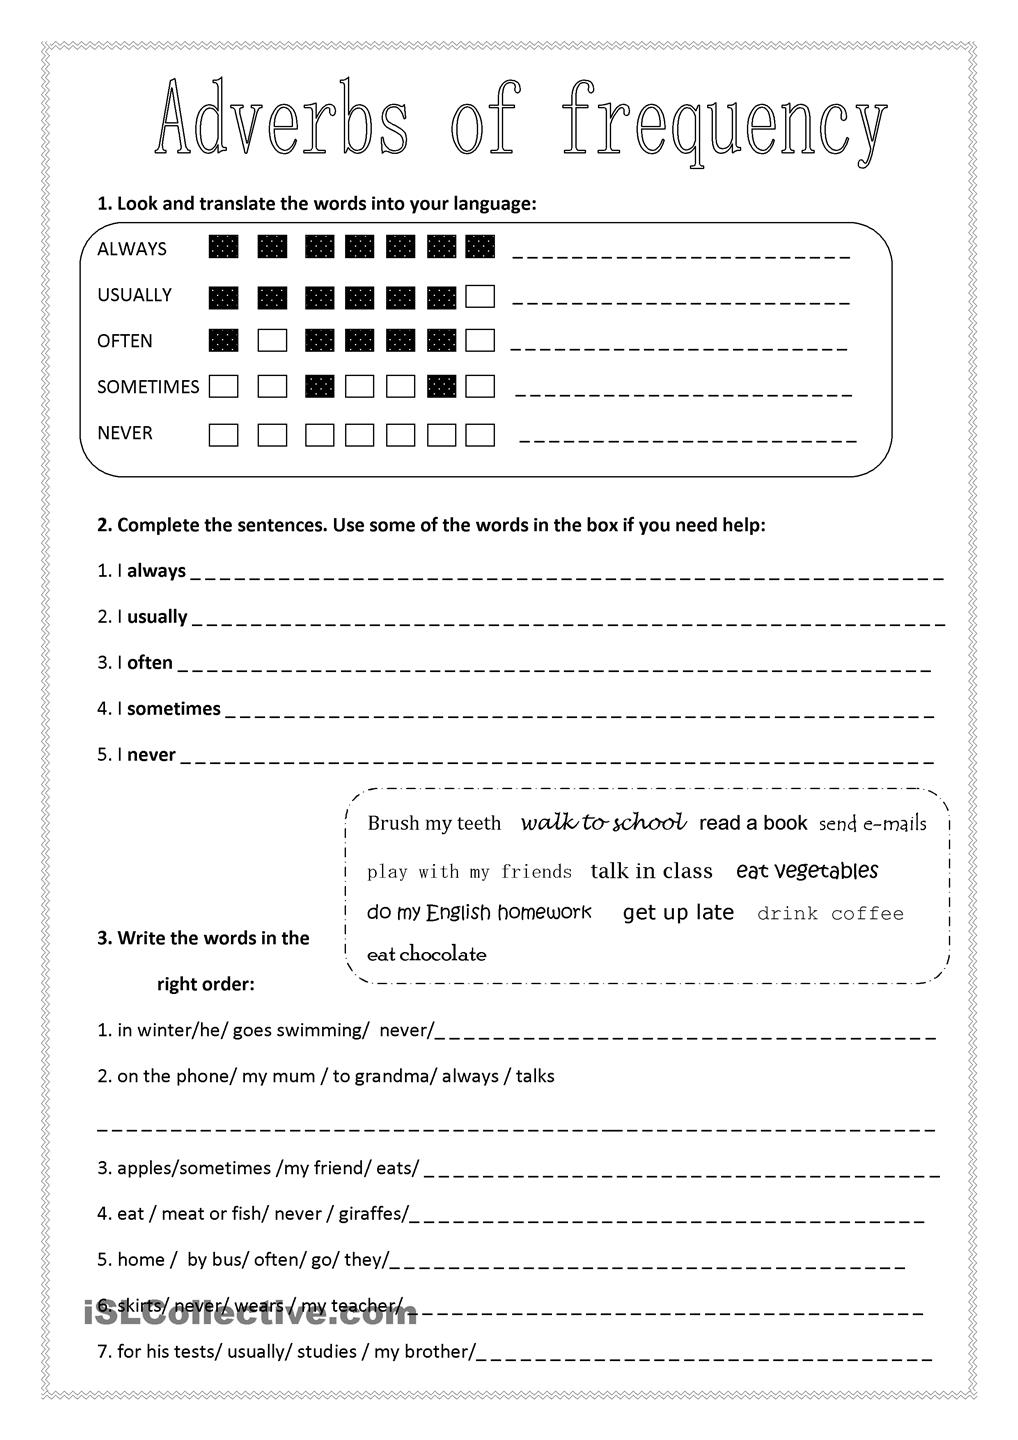 Adverbs Of Frequency Worksheet For Grade 3